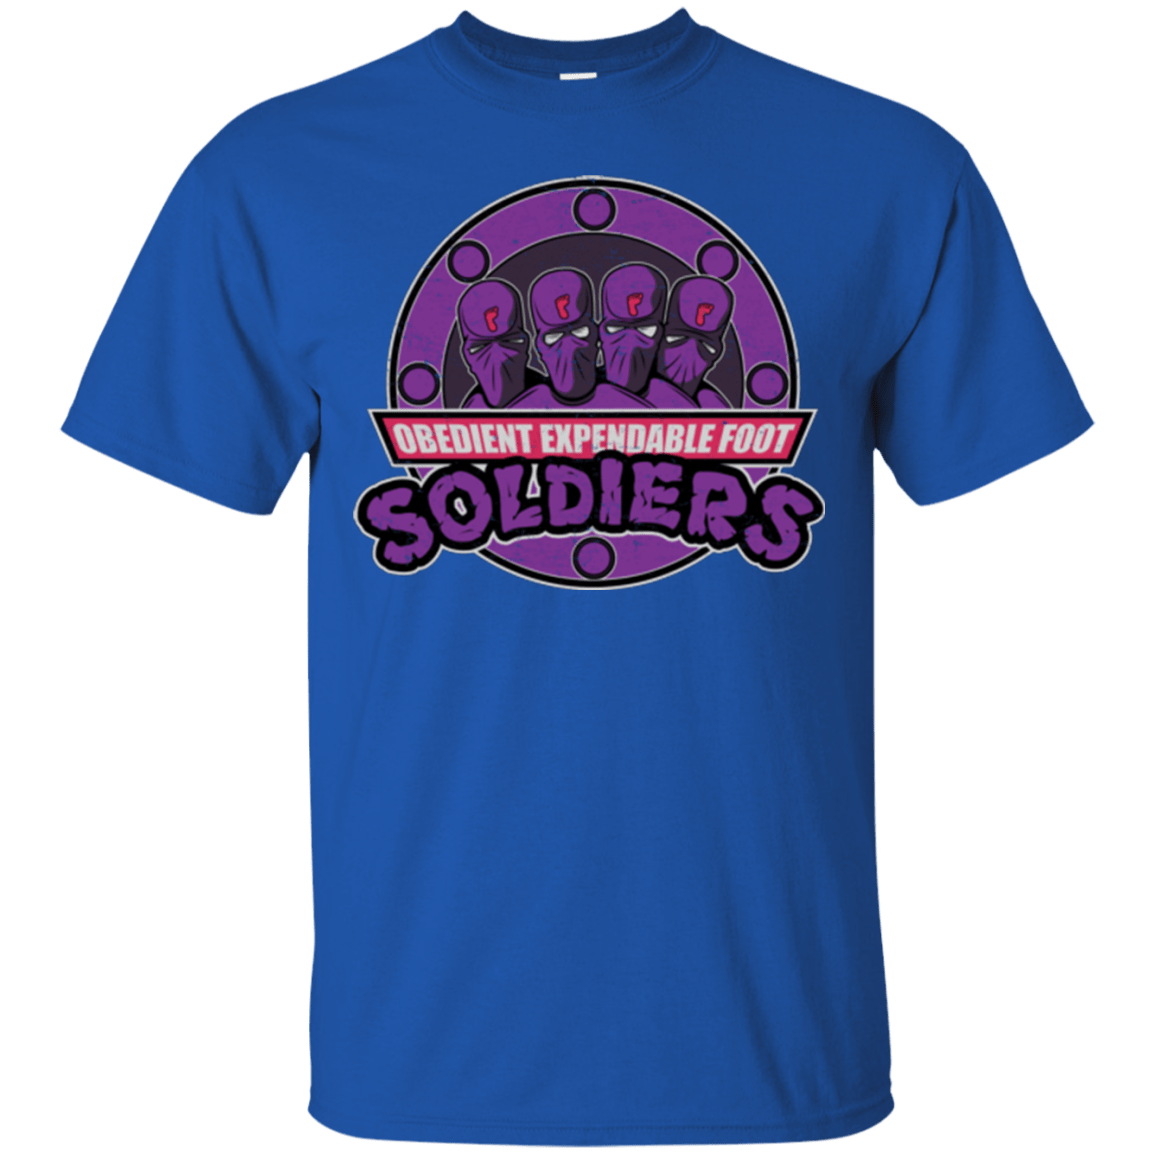 T-Shirts Royal / Small OBEDIENT EXPENDABLE FOOT SOLDIERS T-Shirt